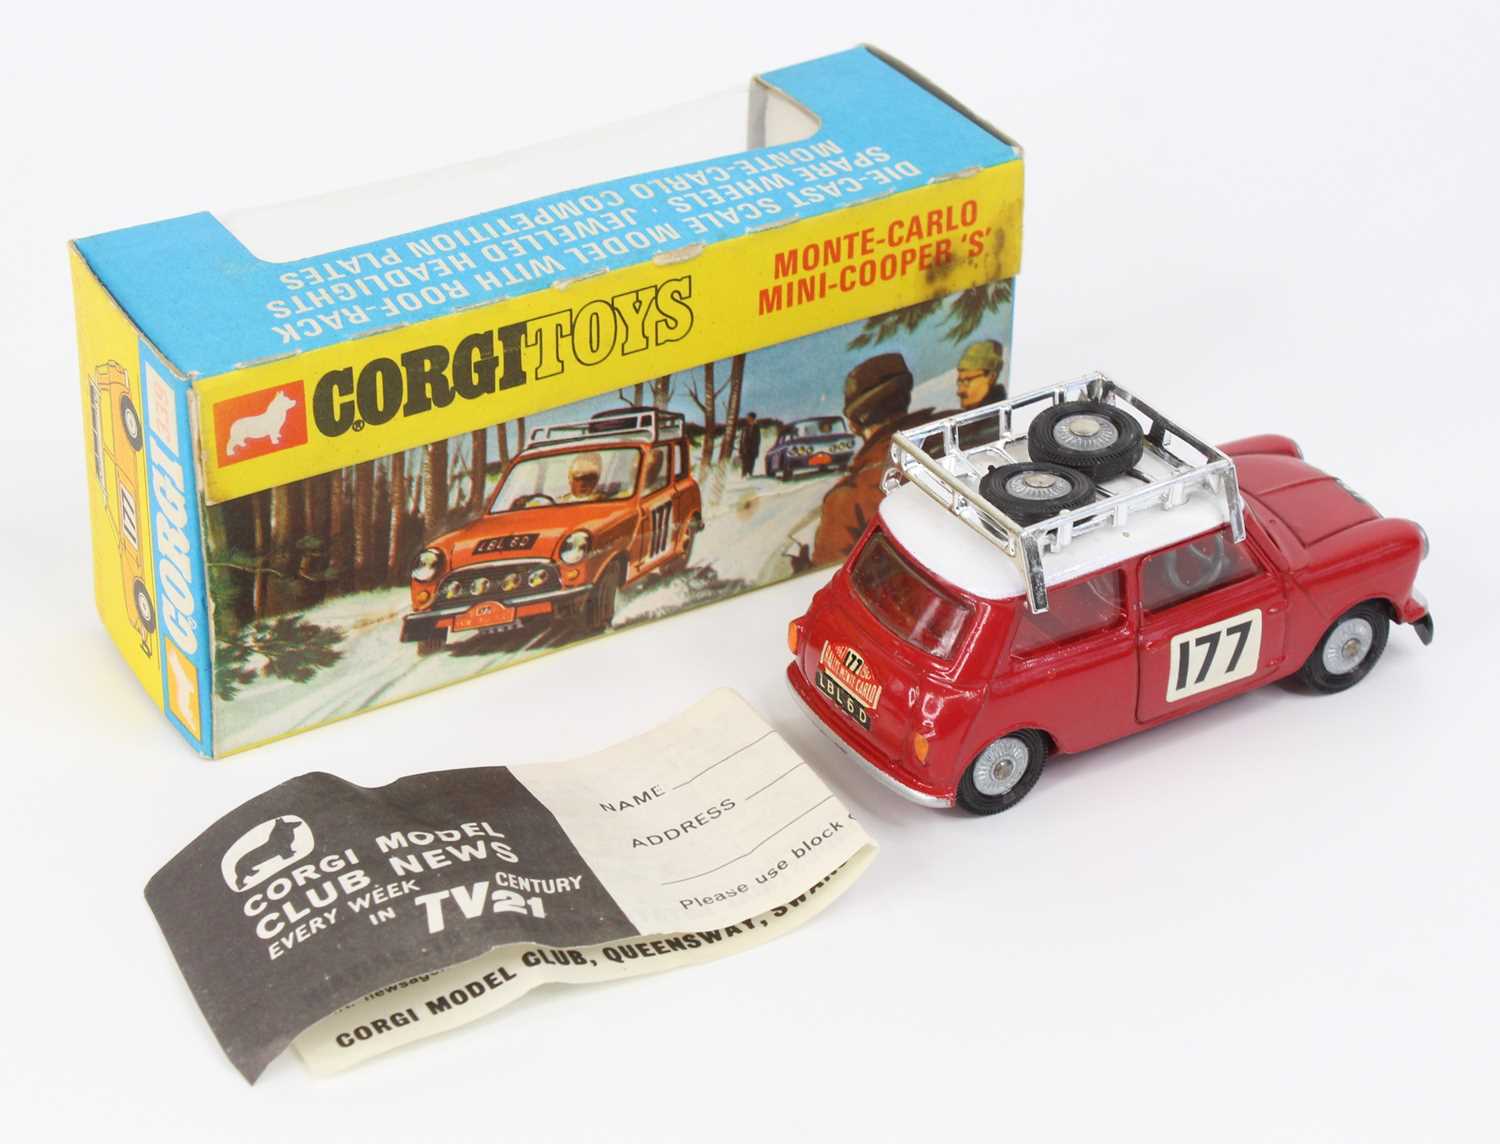 Corgi Toys, 339 Mini Cooper S Monte Carlo Winner, red body with white roof, racing number 177, 2 - Image 2 of 4